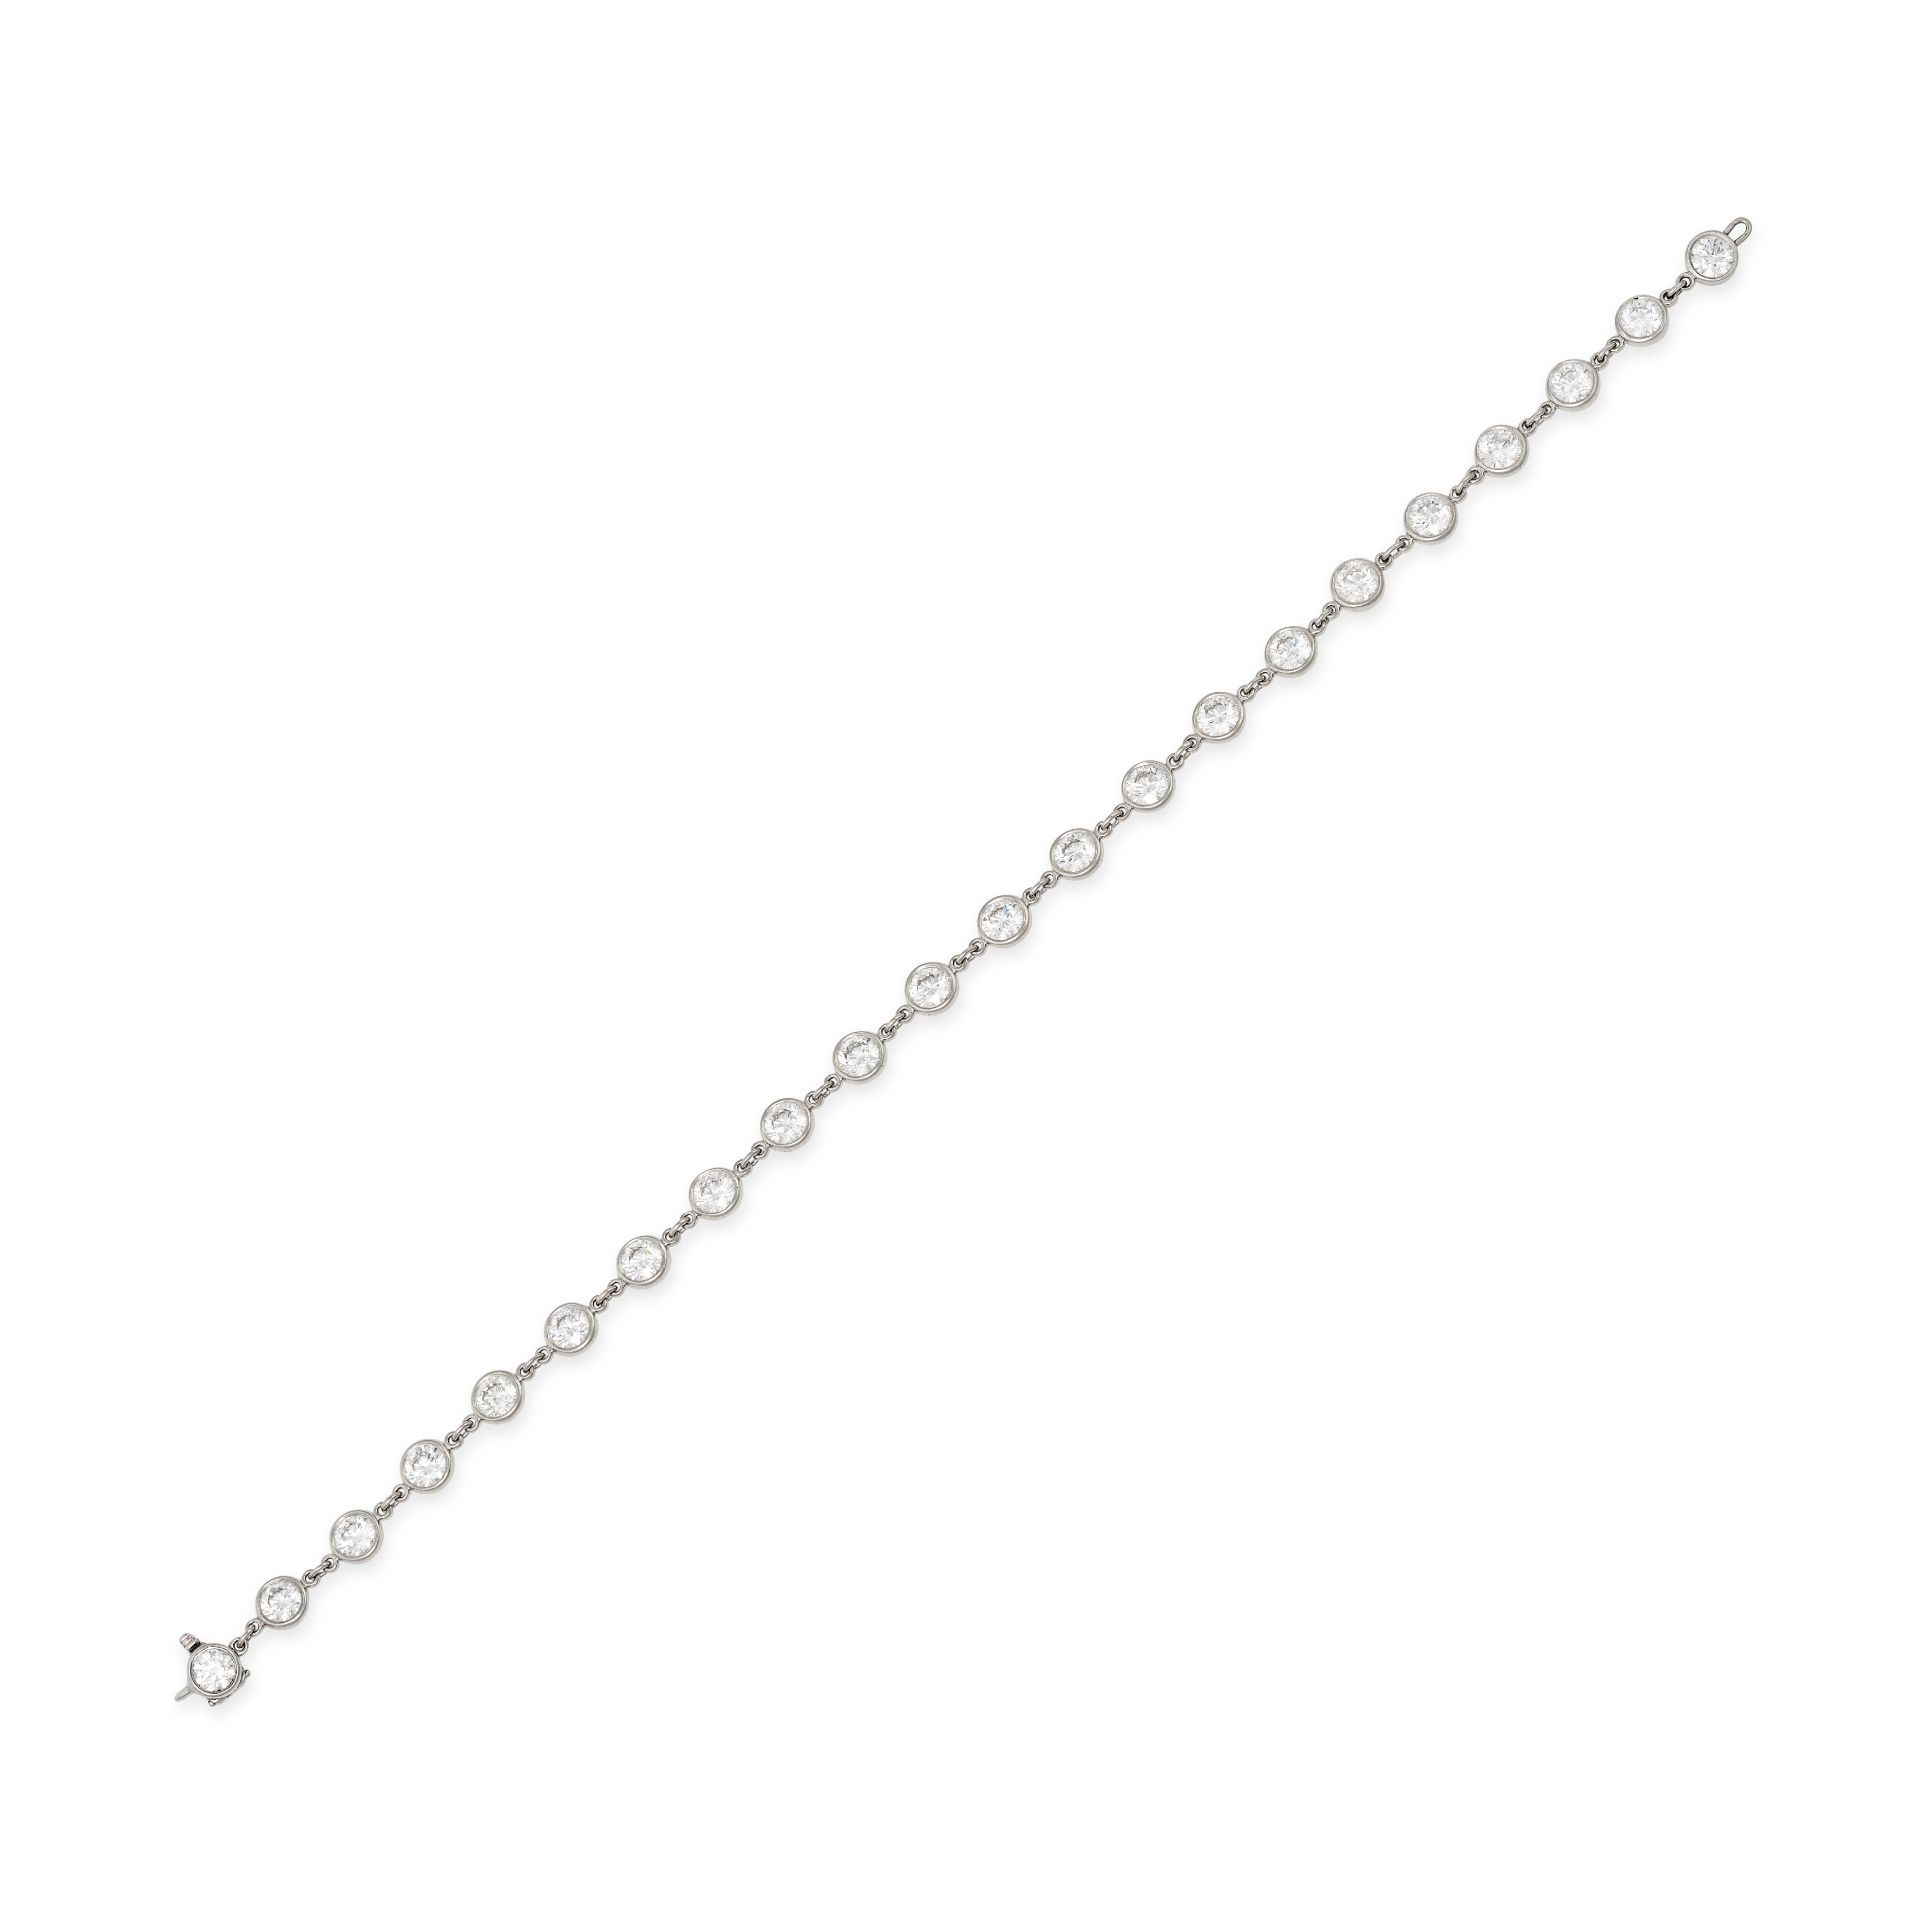 ELSA PERETTI FOR TIFFANY & CO., A DIAMONDS BY THE YARD DIAMOND BRACELET in platinum, comprising a...